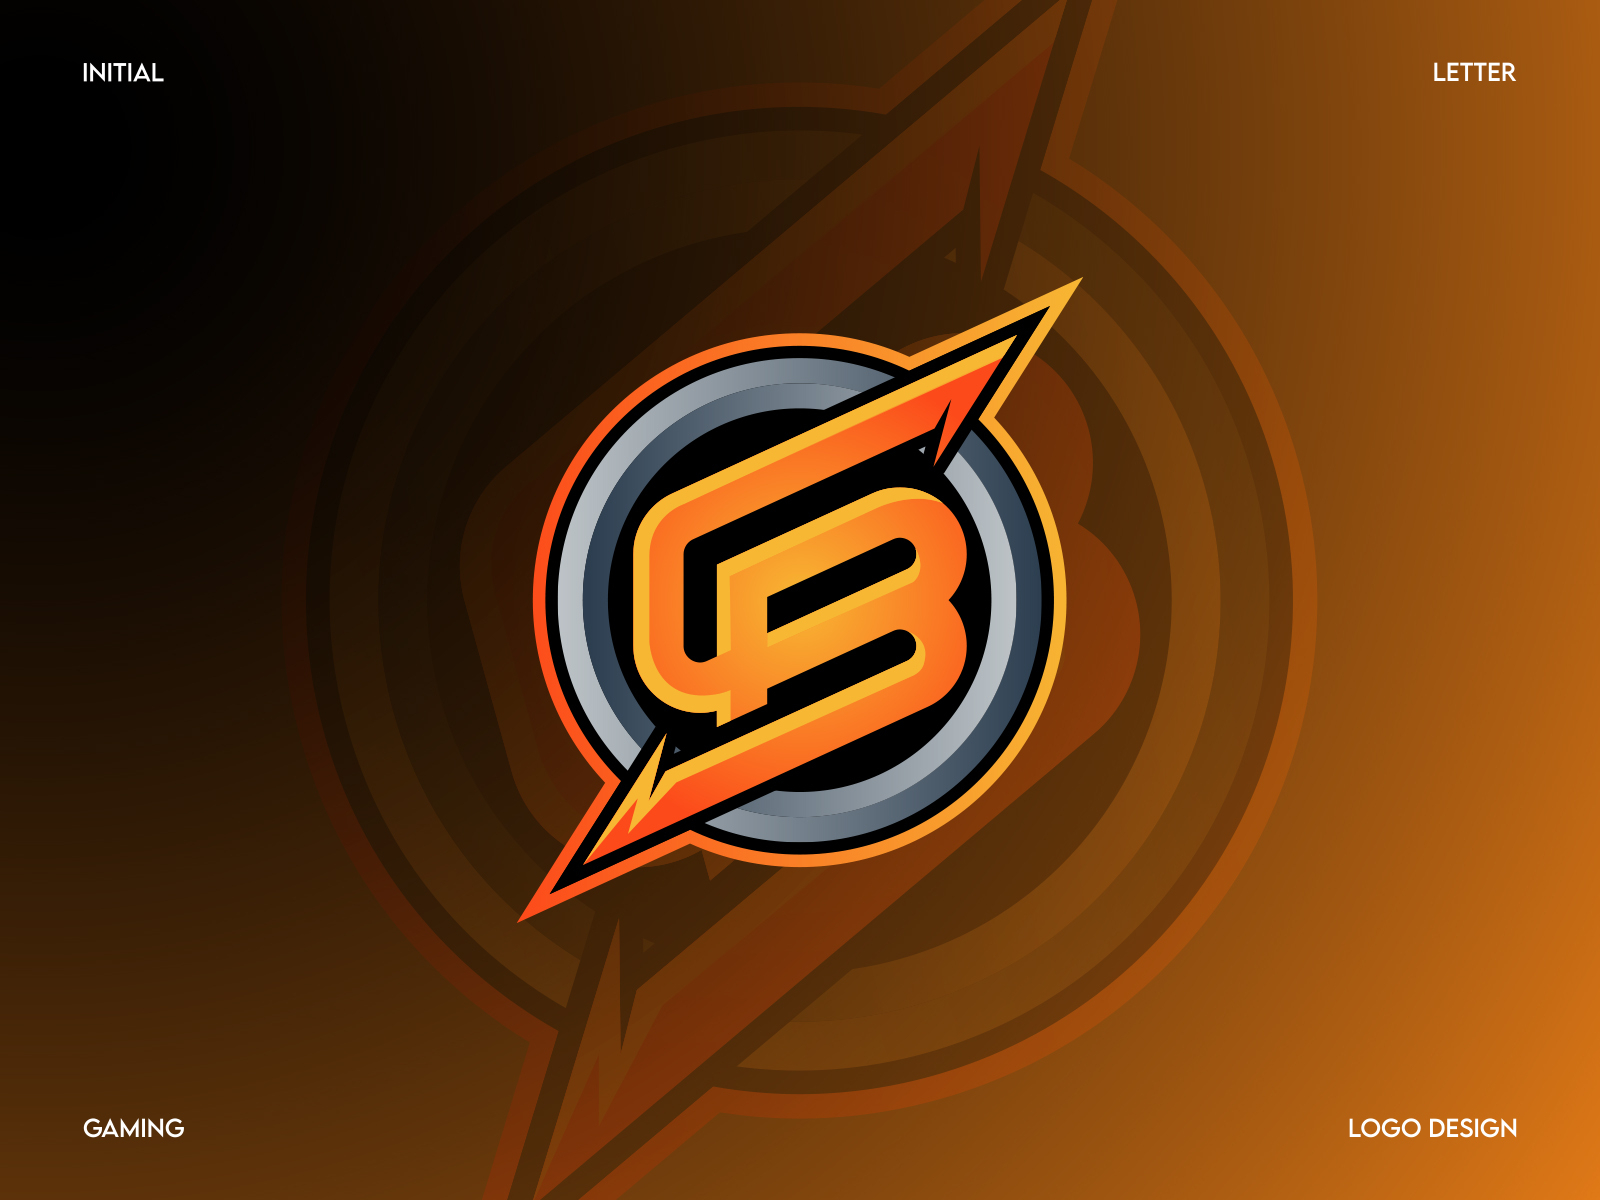 CB LETTER INITIALL GAMING LOGO DESIGN by Roshme Akther on Dribbble